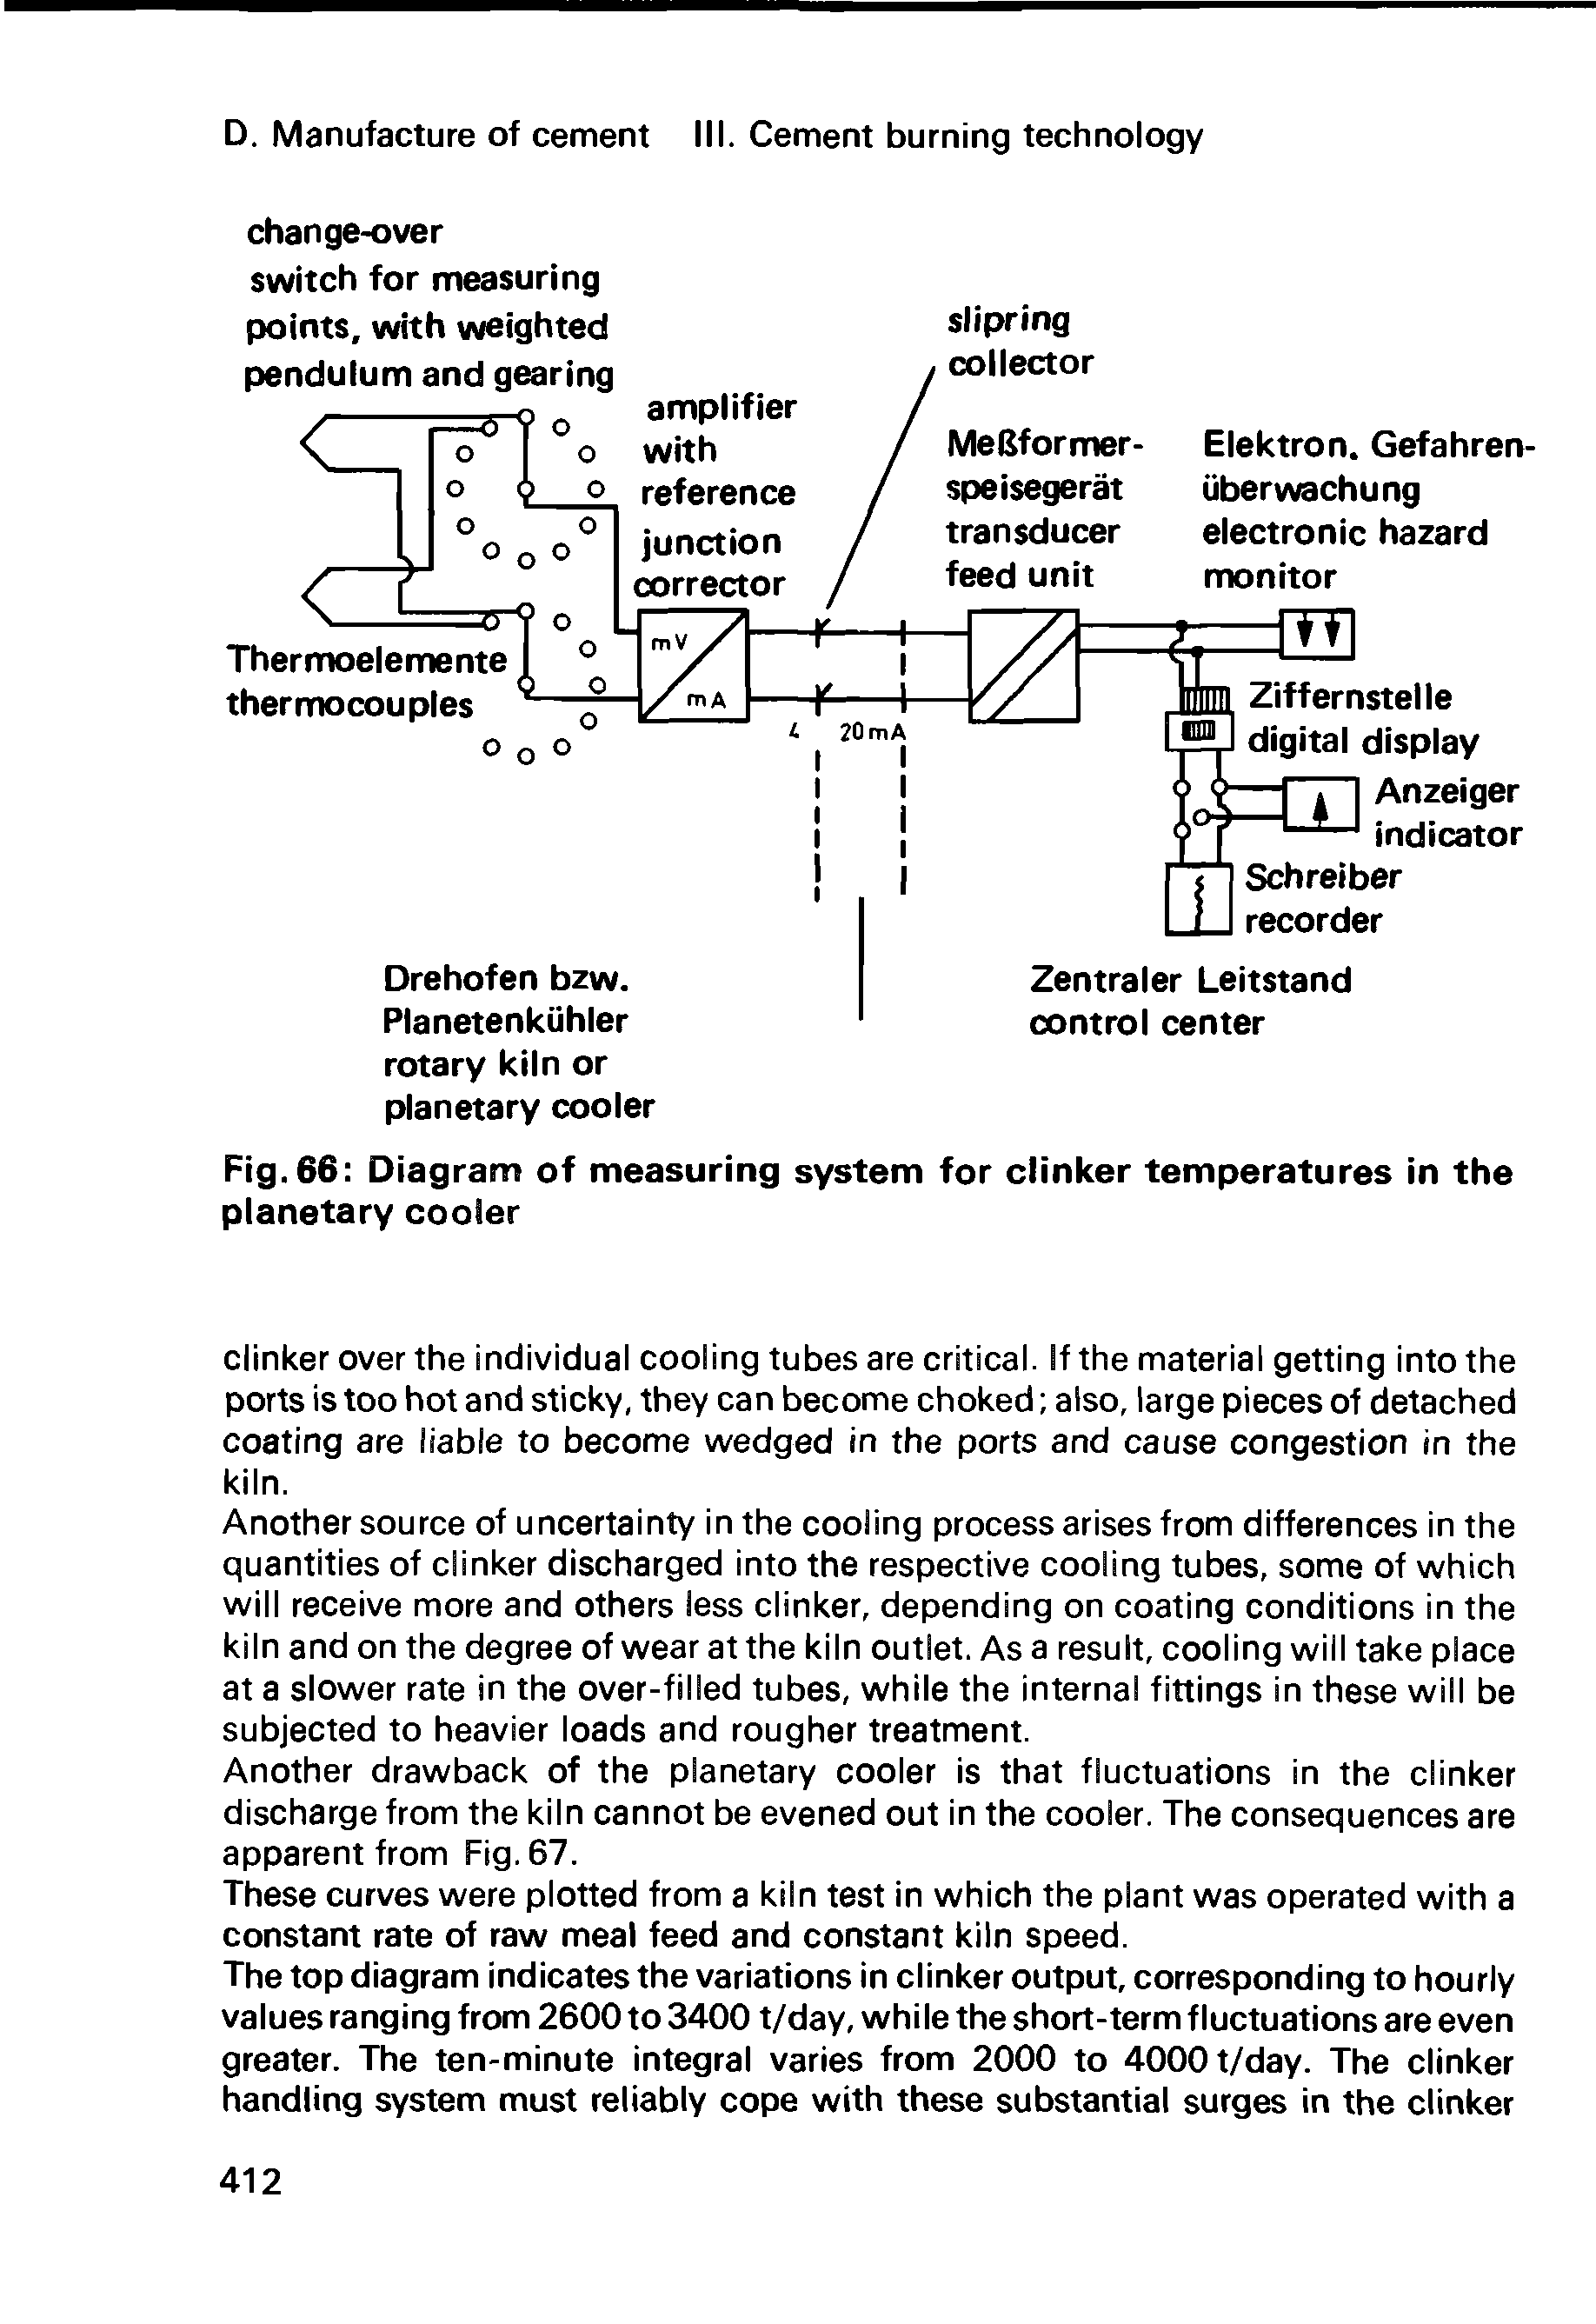 Fig. 66 Diagram of measuring system for clinker temperatures in the planetary cooler...